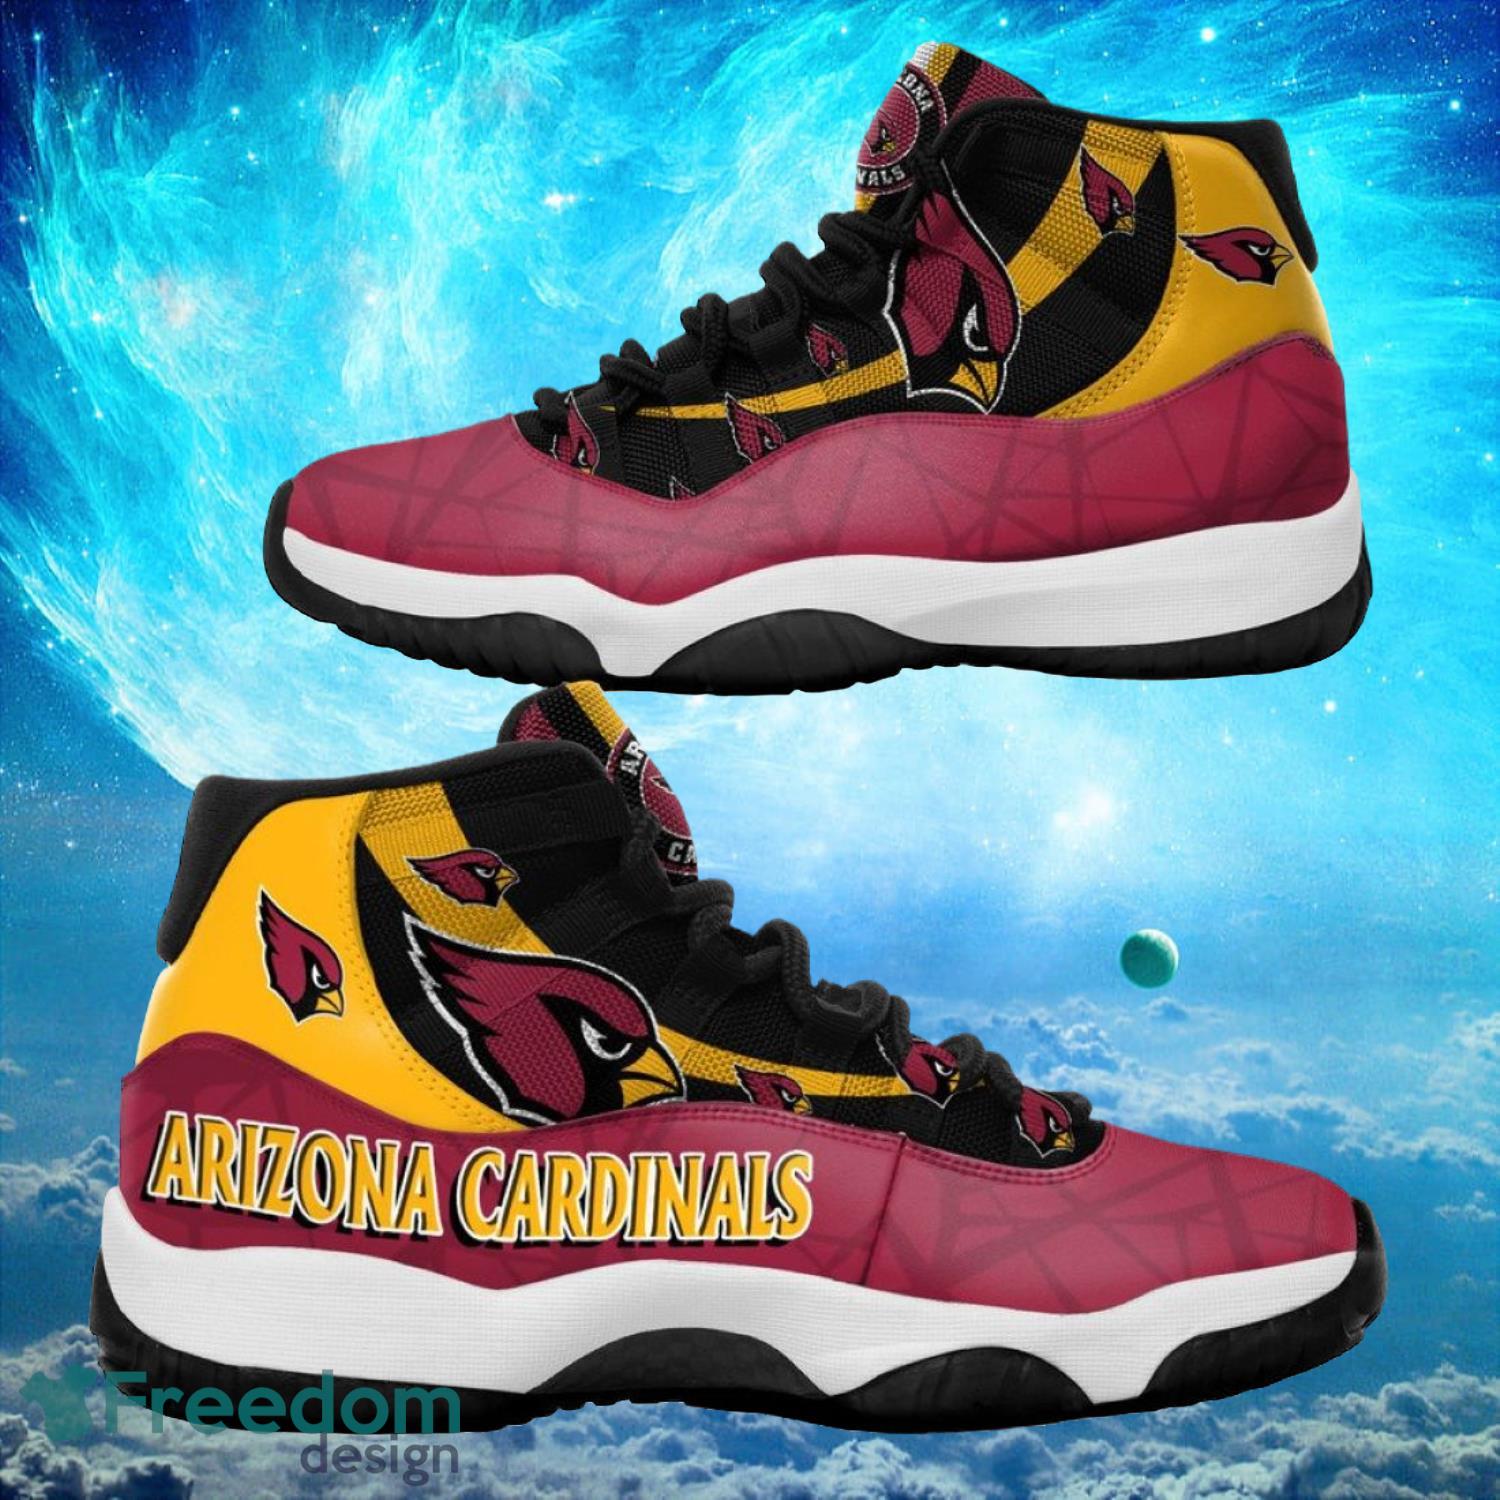 Arizona Cardinals NFL Air Jordan 11 Sneakers Shoes Gift For Fans Product Photo 1